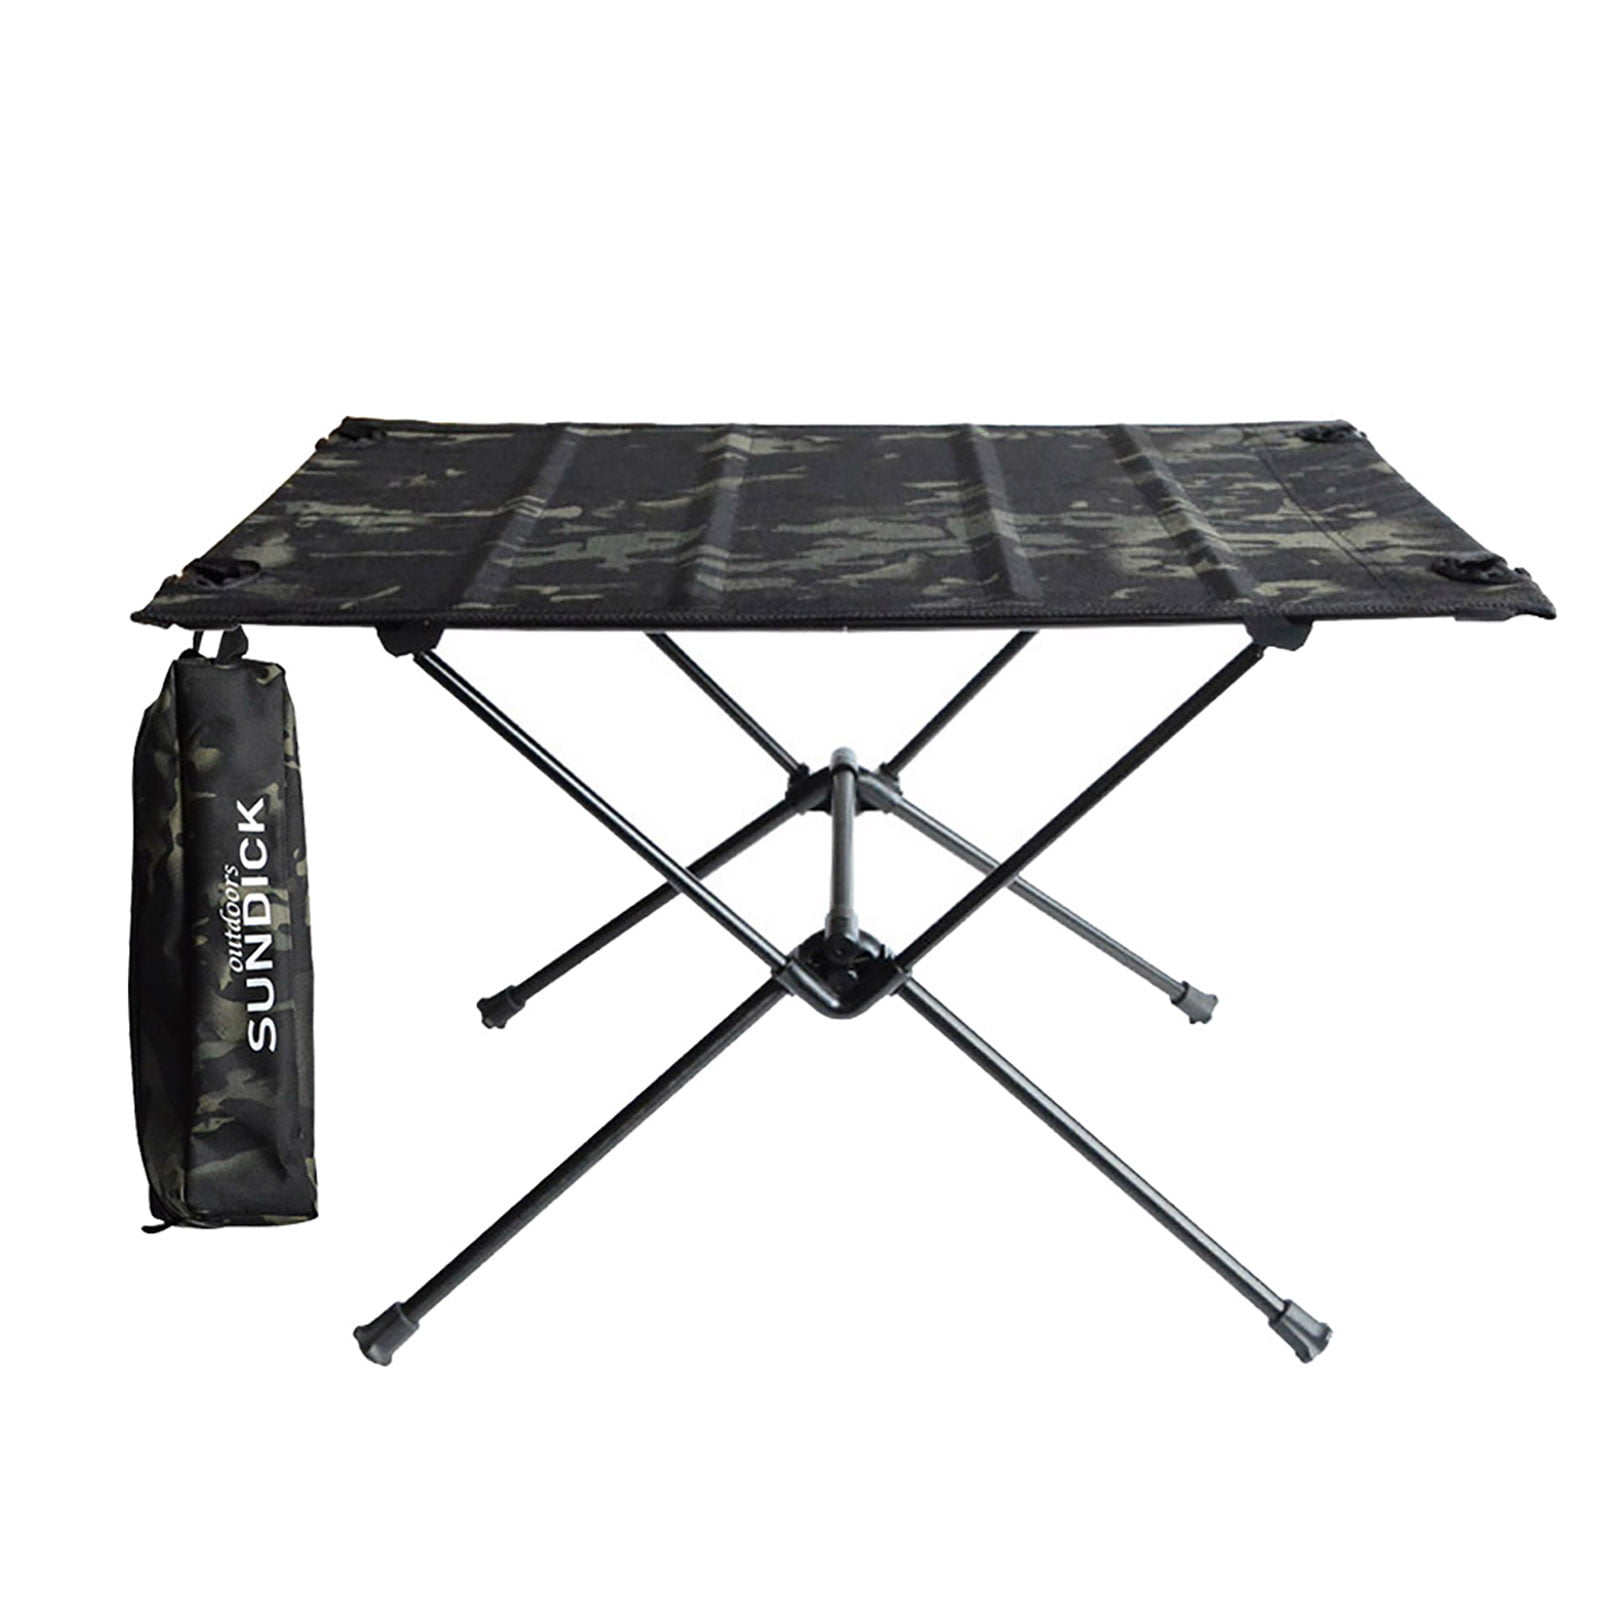 SUNDICK Outdoor Folding Table BBQ Camping Square Table with Storage Bag ✧ 